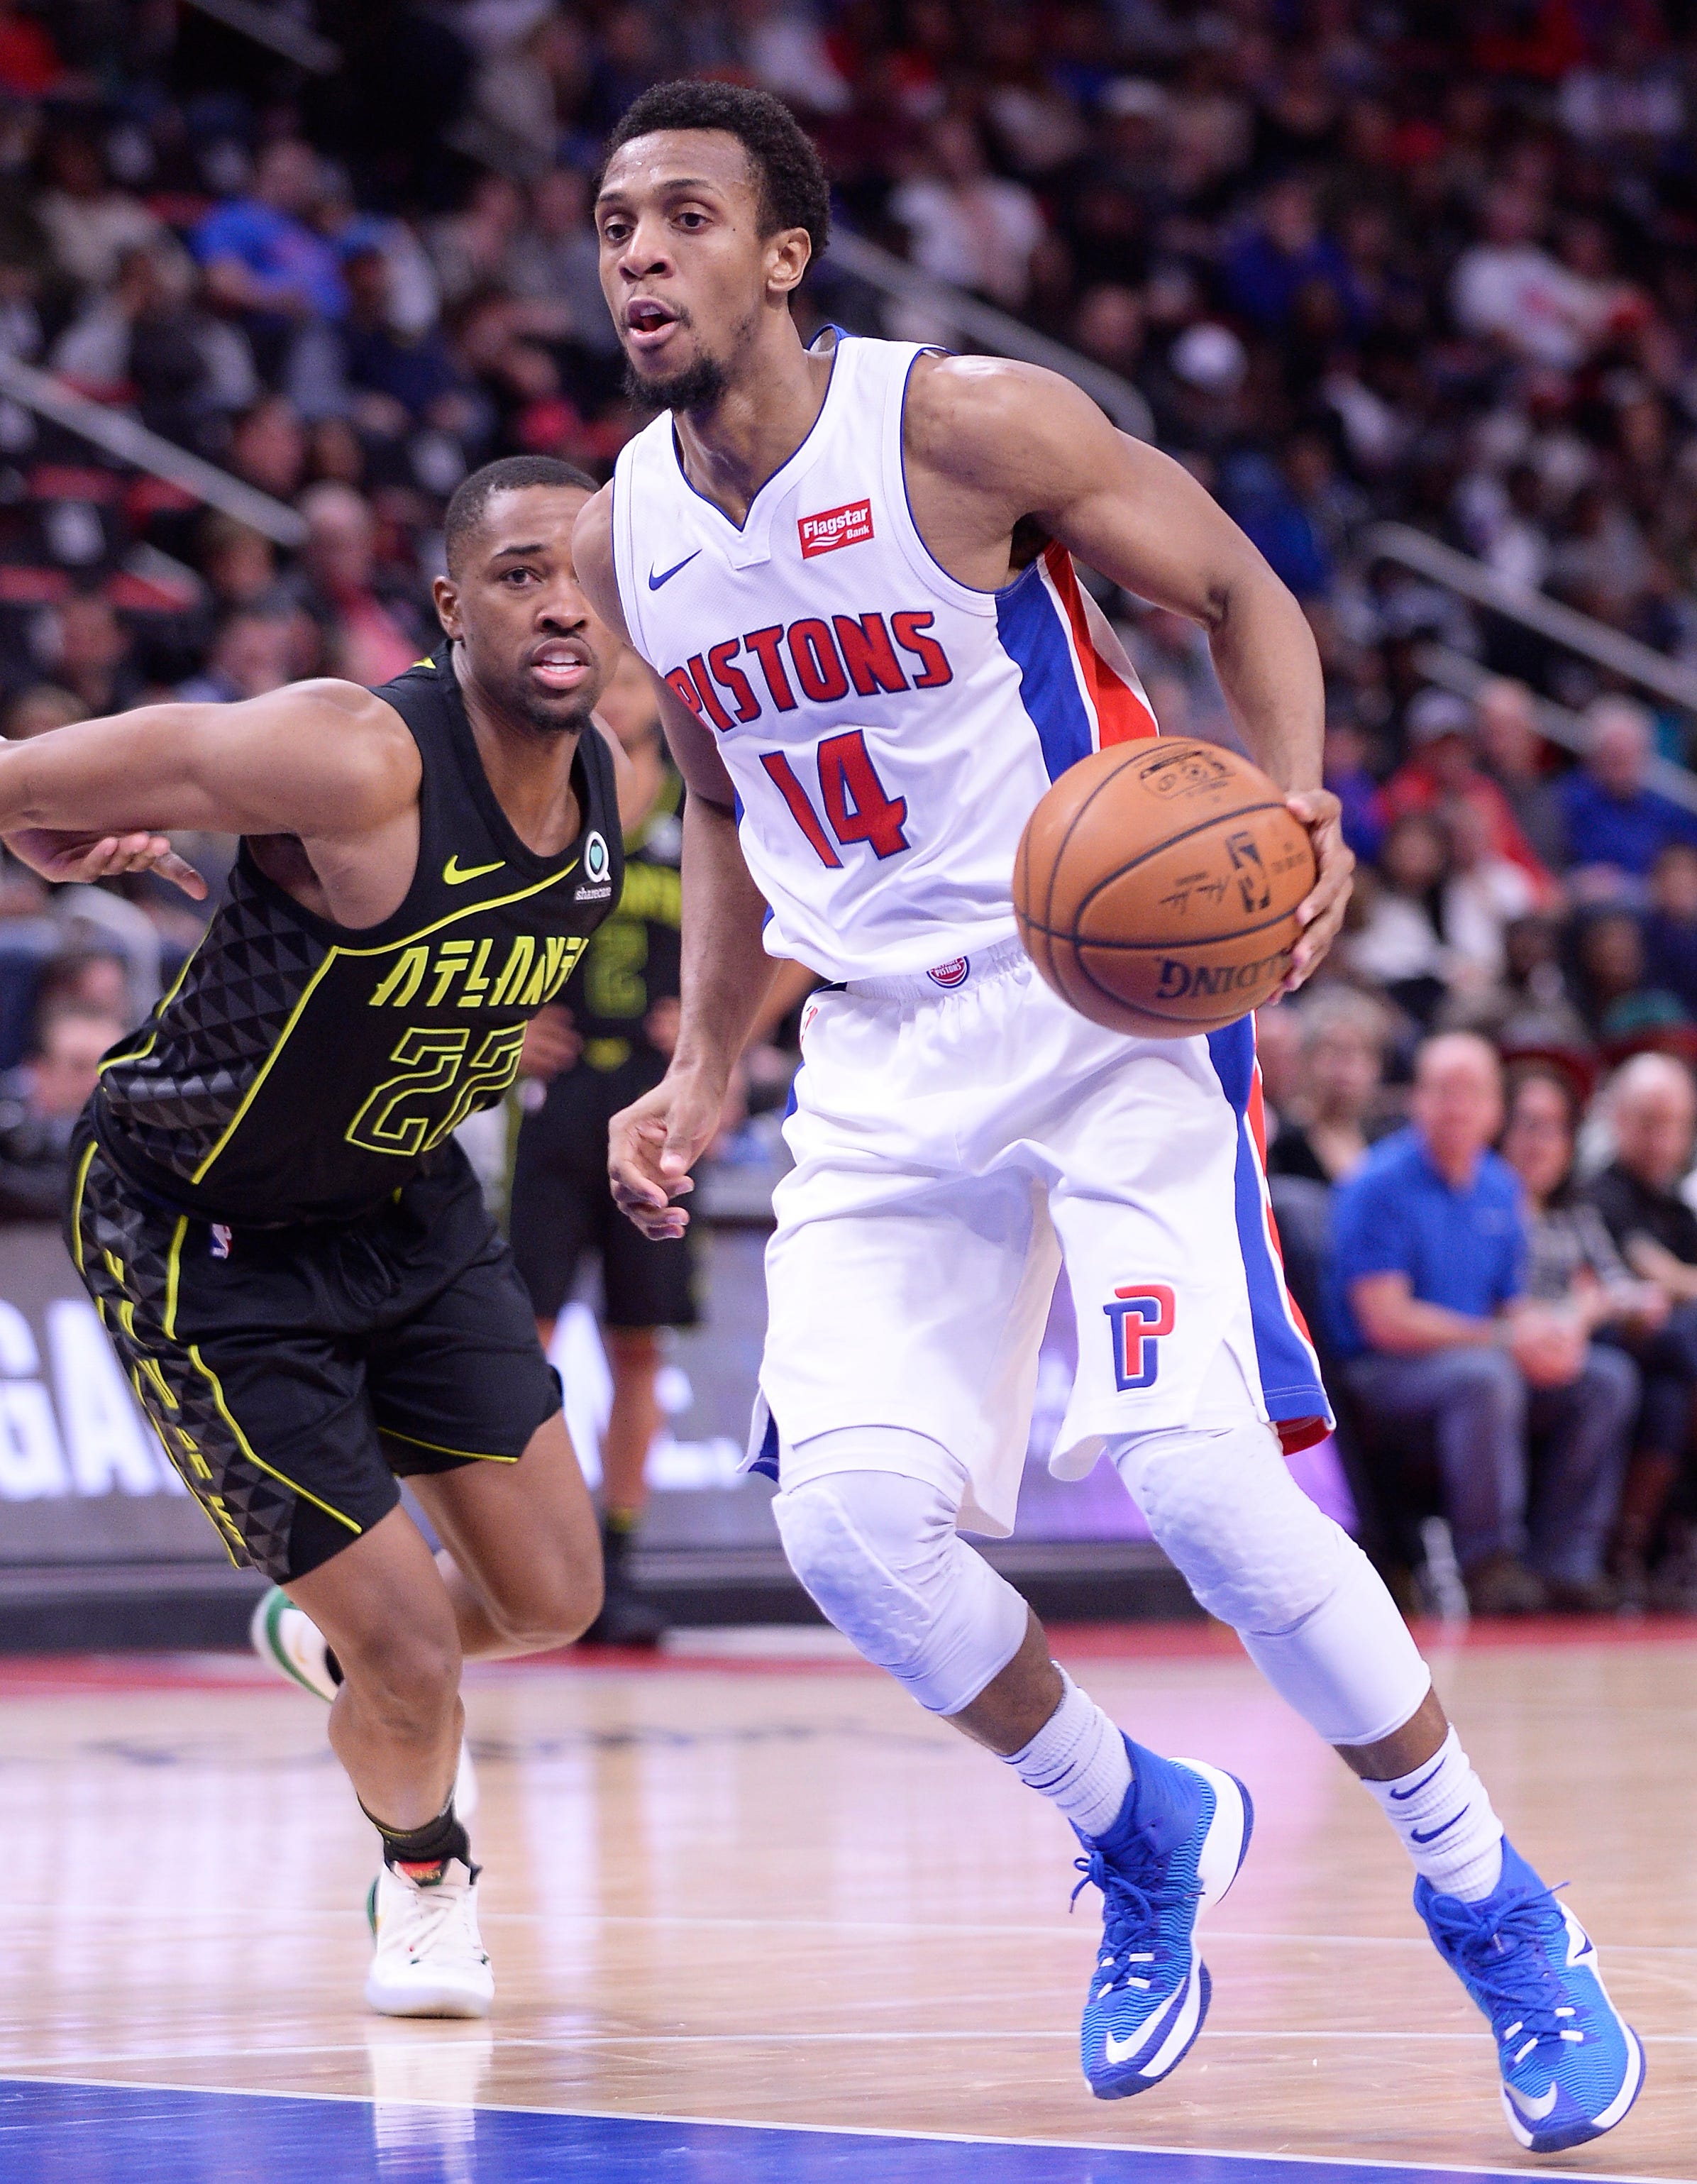 8. Ish Smith, G: He would be much higher on this list if he shot better beyond the arc (35 percent) or if he were more effective in a regular starting role. Still, Smith has worked very well with the reserves and is the engine to their up-and-down style of play.